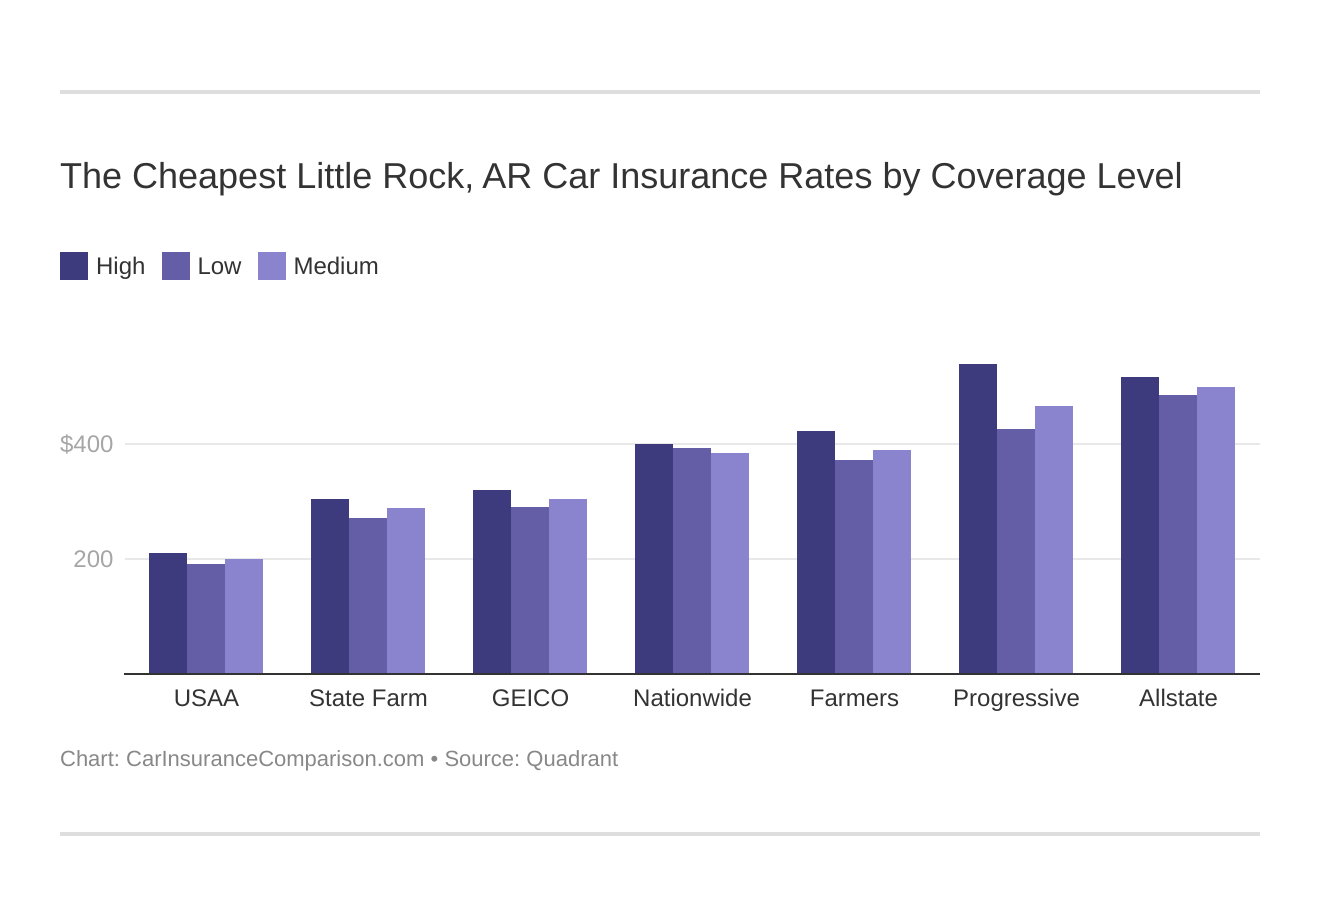 The Cheapest Little Rock, AR Car Insurance Rates by Coverage Level